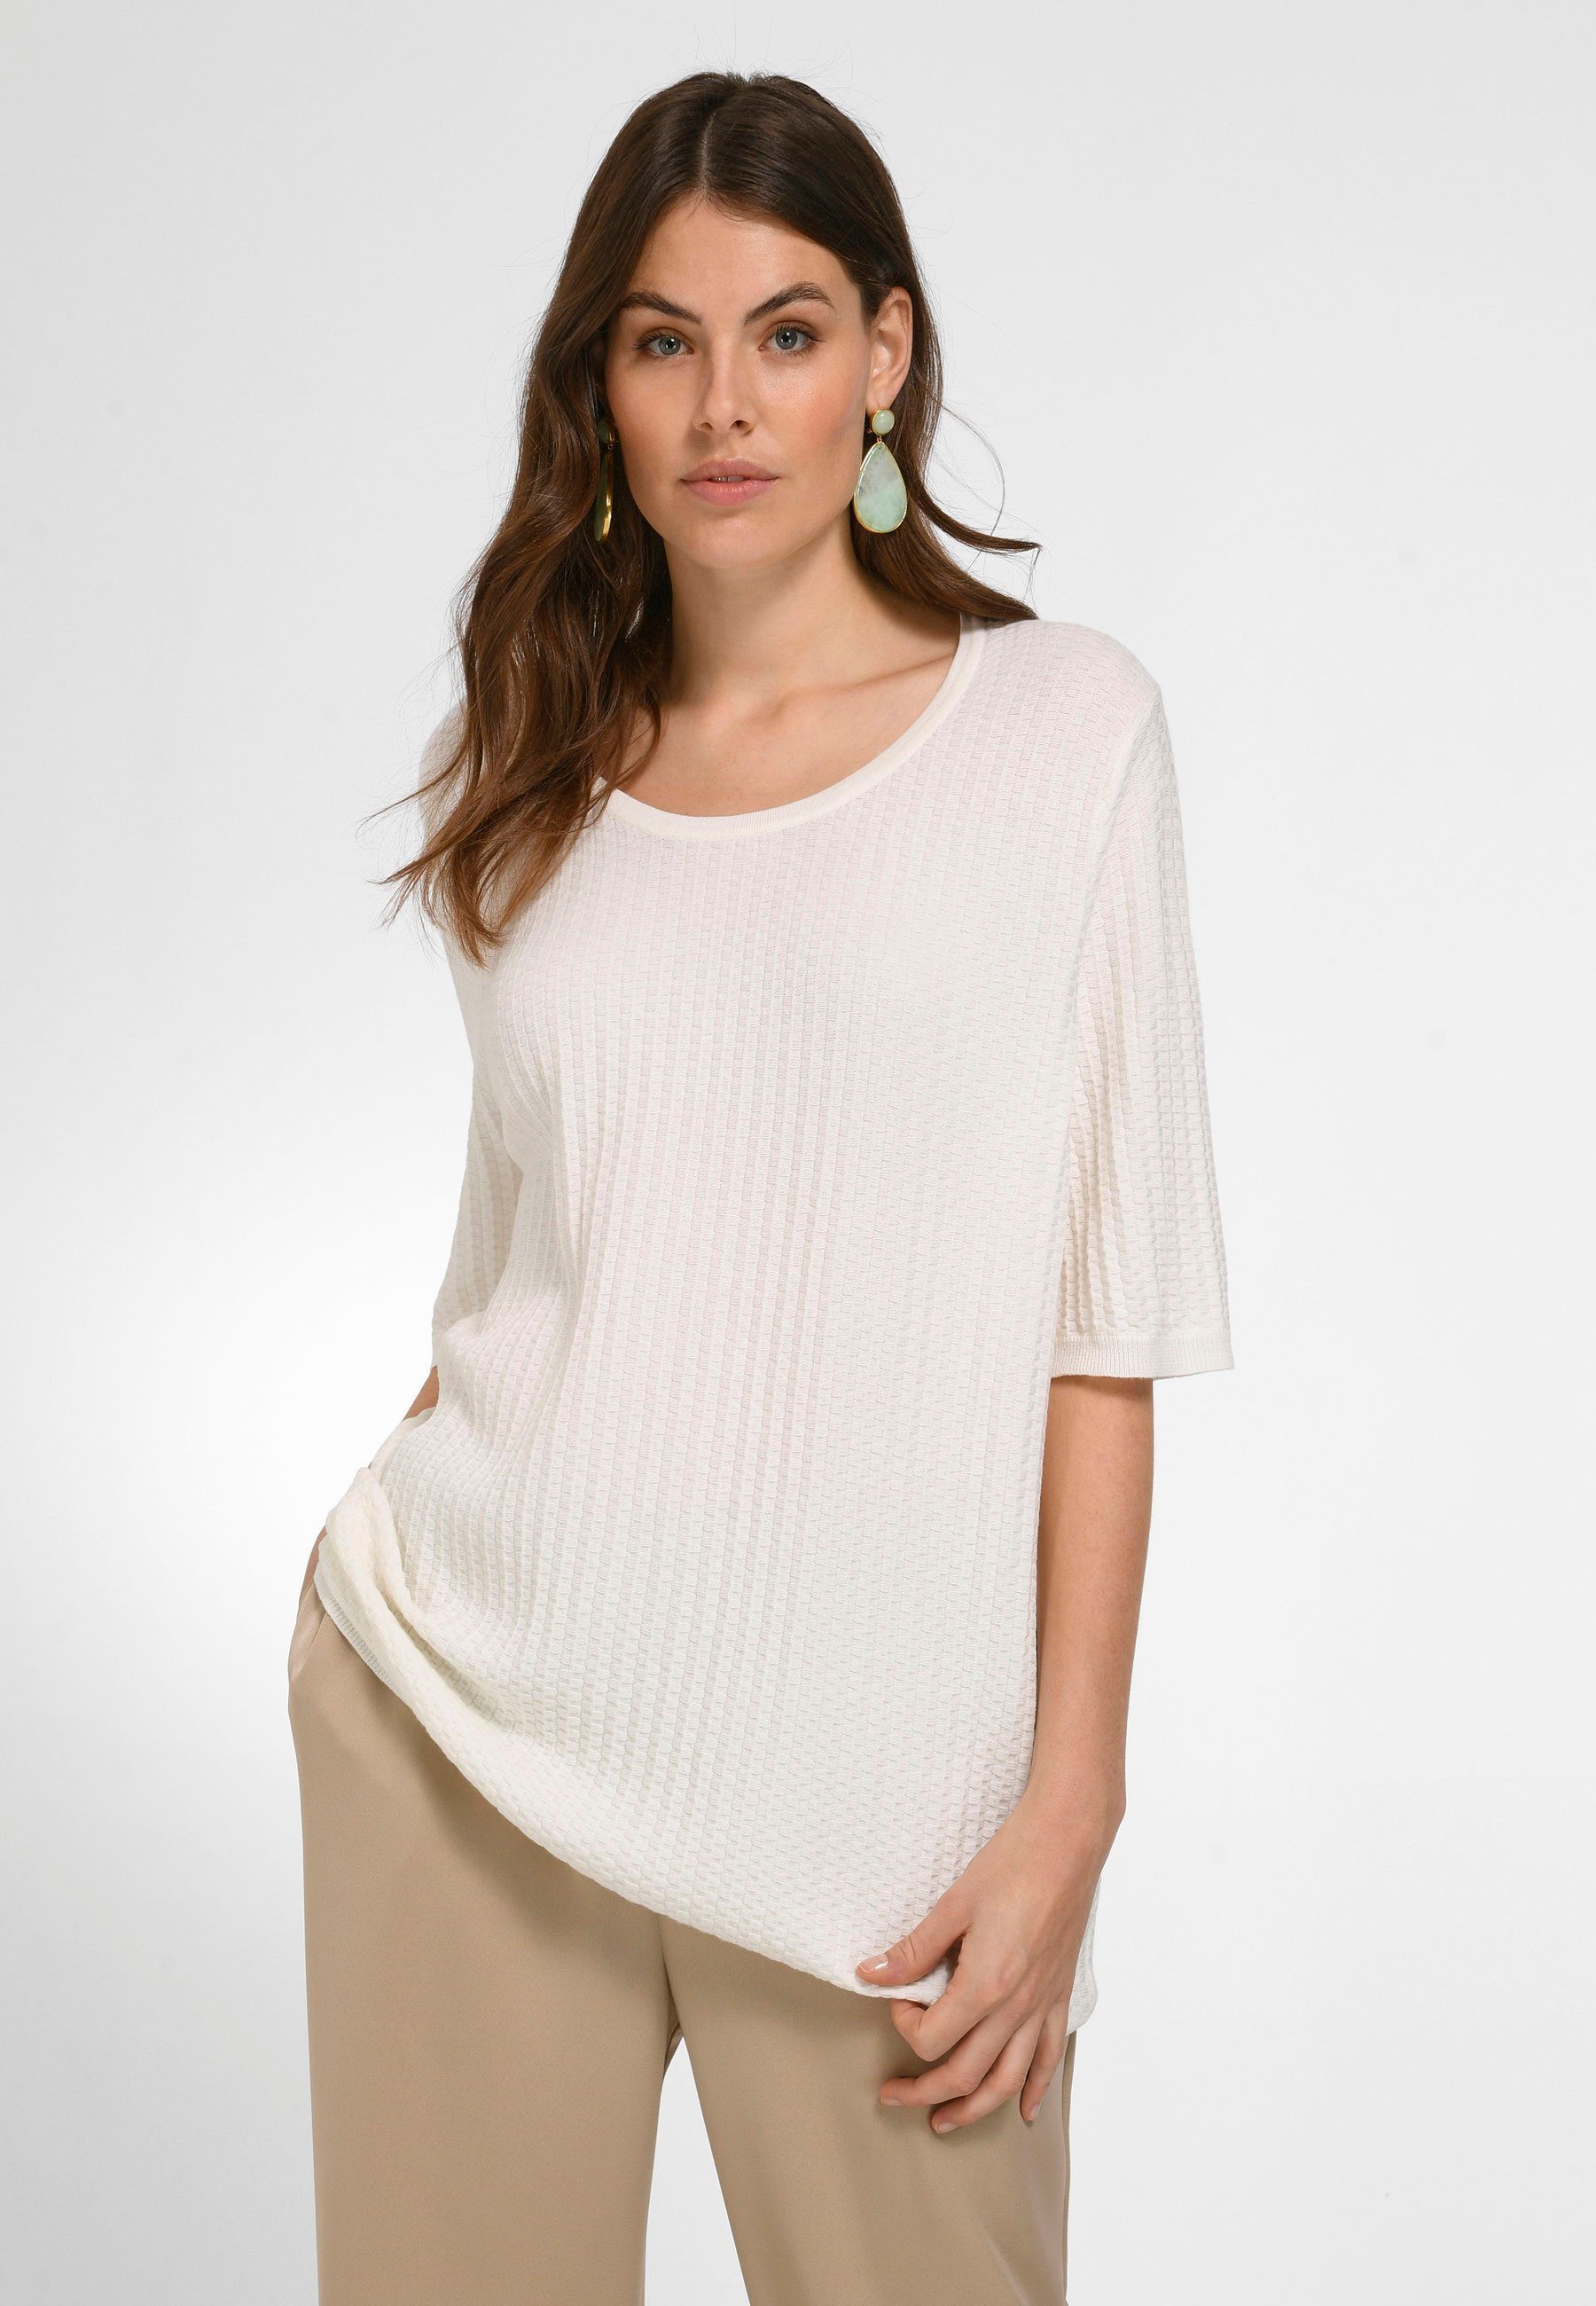 Lay Strickpullover Pullover weiss Emilia